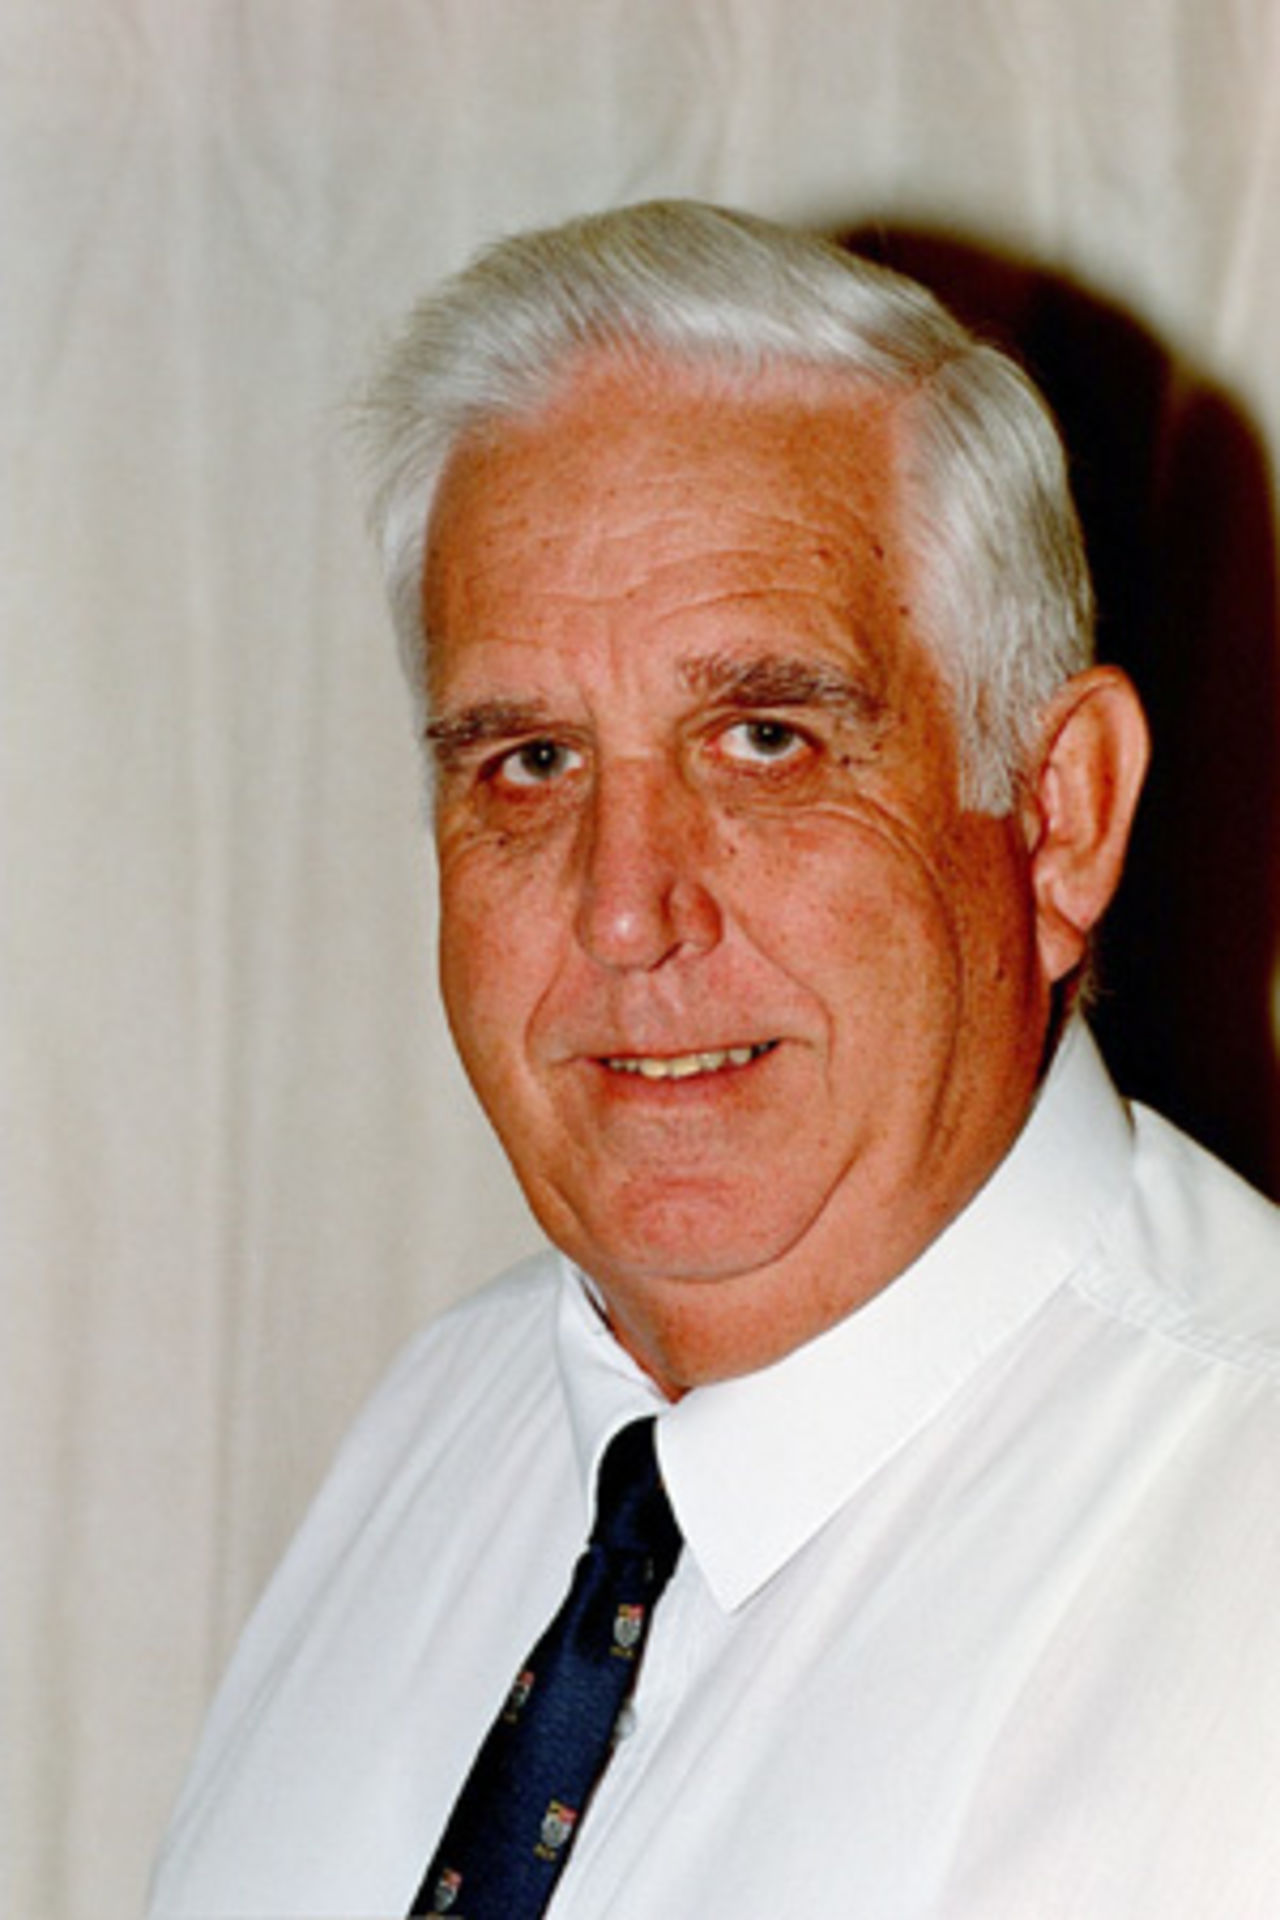 Portrait of Peter Wright, New Zealand reserve panel umpire in the 2002/03 season.